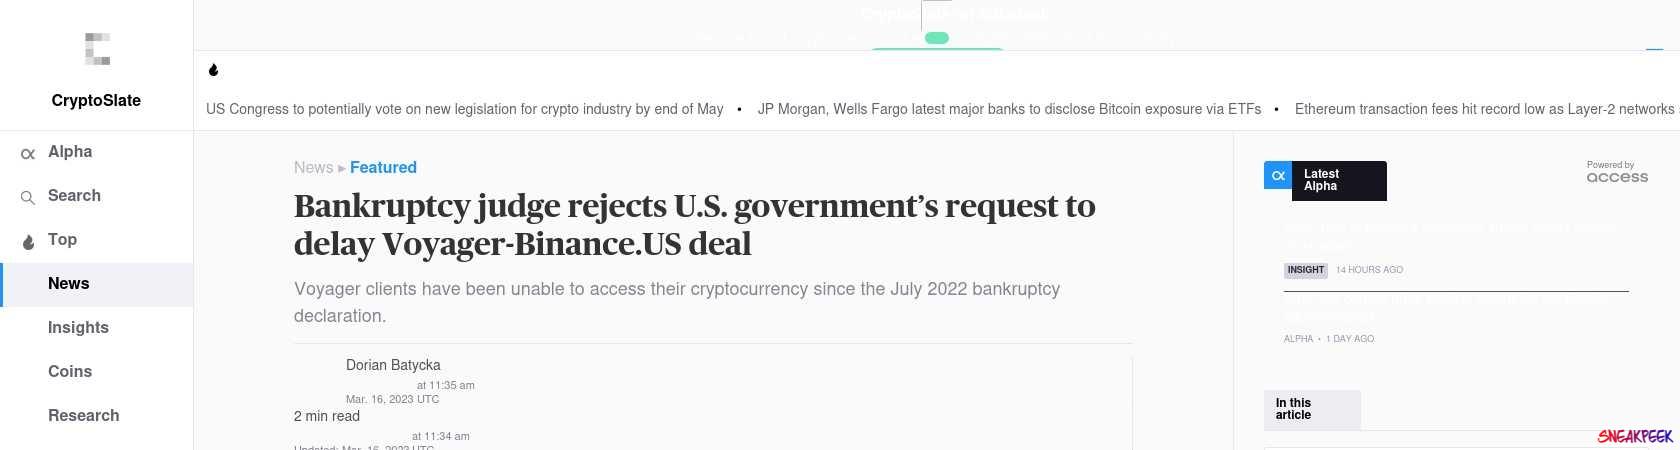 Read the full Article:  ⭲ Bankruptcy judge rejects U.S. government’s request to delay Voyager-Binance.US deal